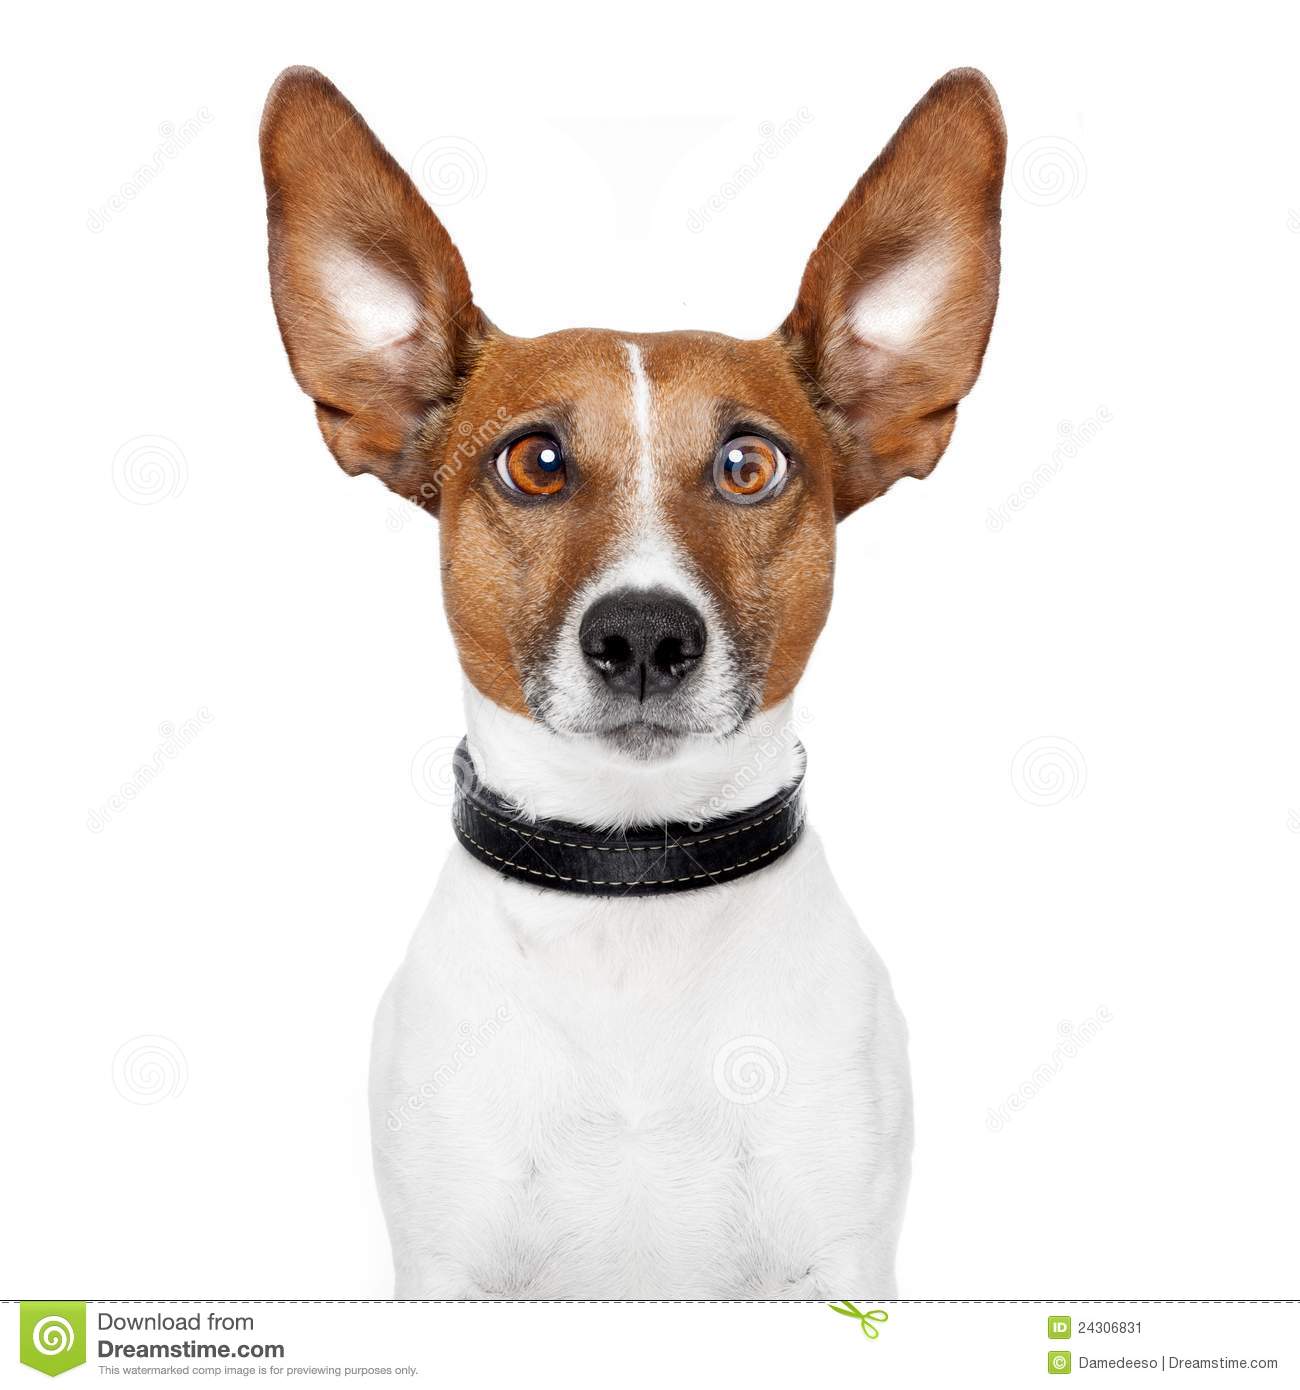 More Similar Stock Images Of   Crazy Dog With Big Lazy Eyes